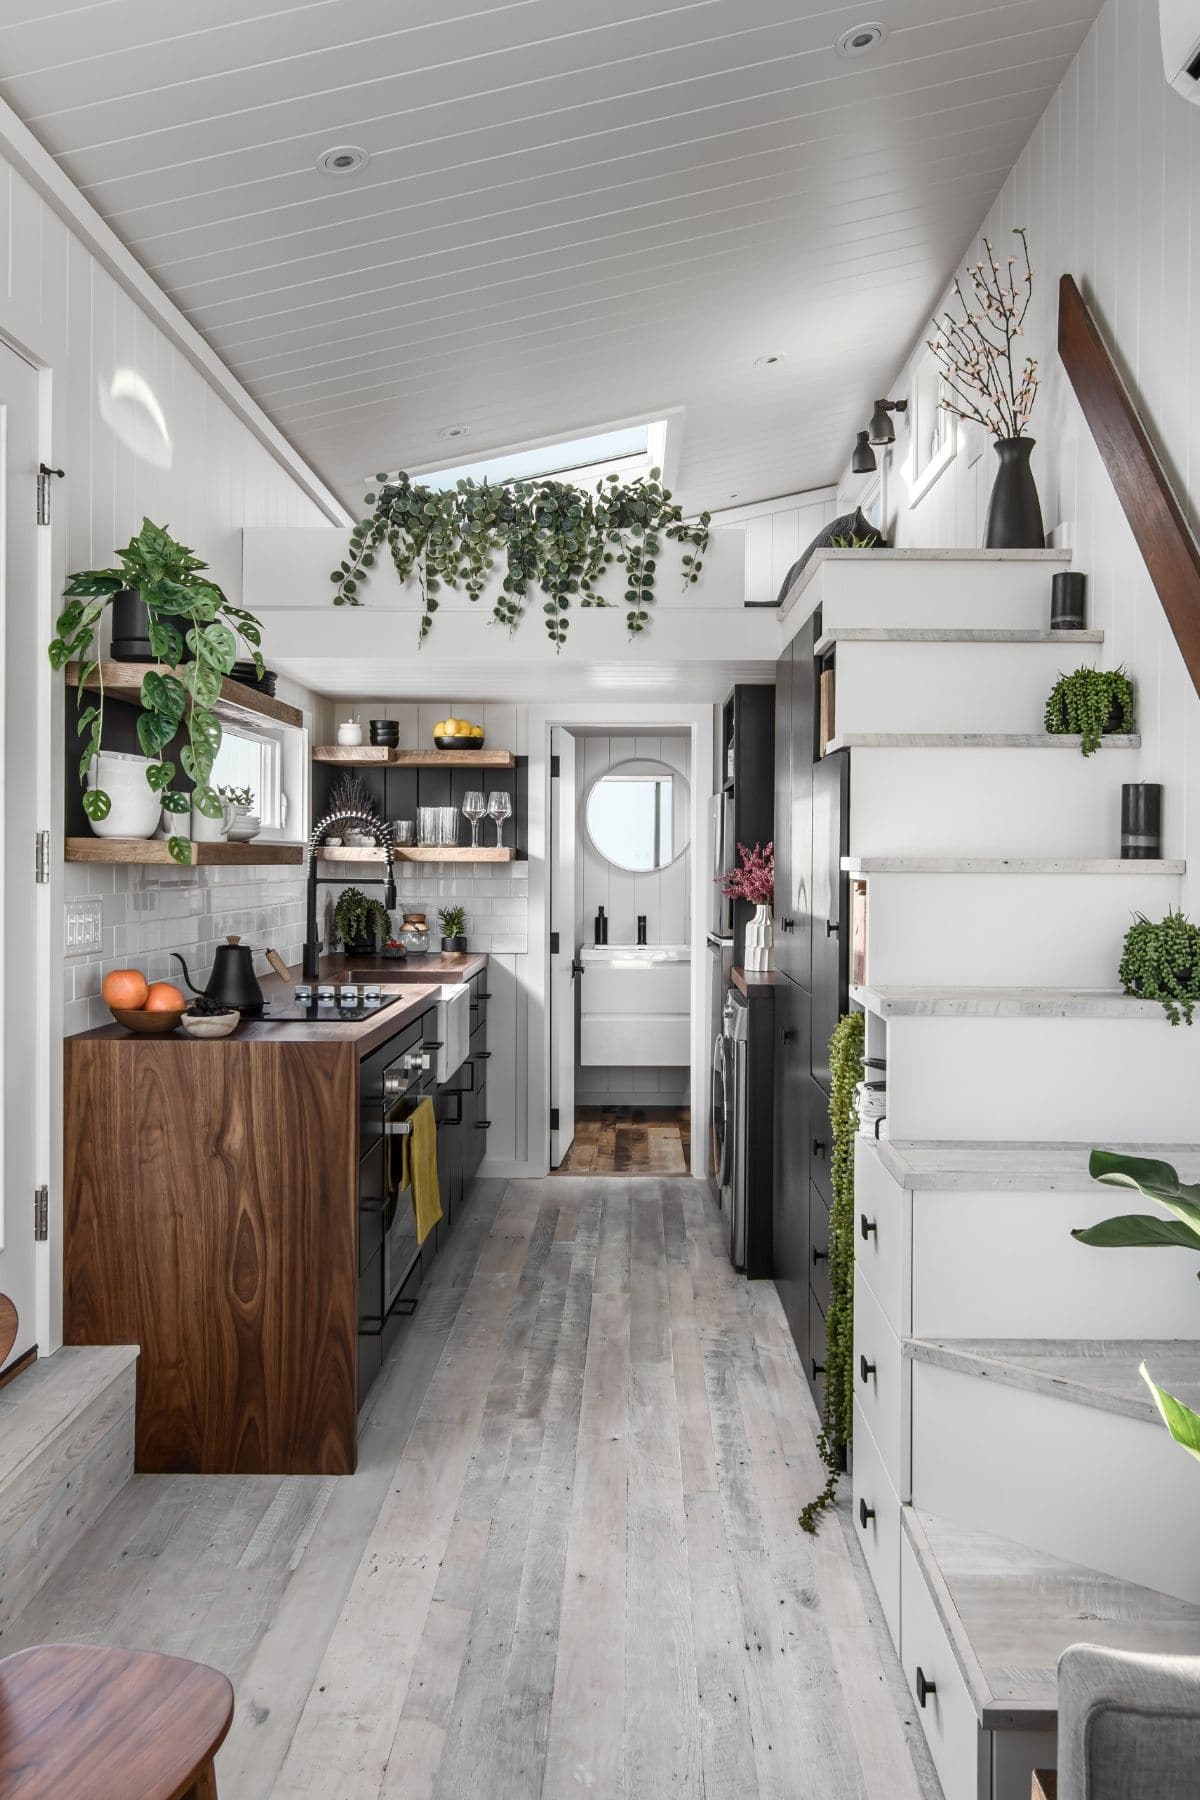 View into tiny home with white stairs to loft on right and kitchen counter on left